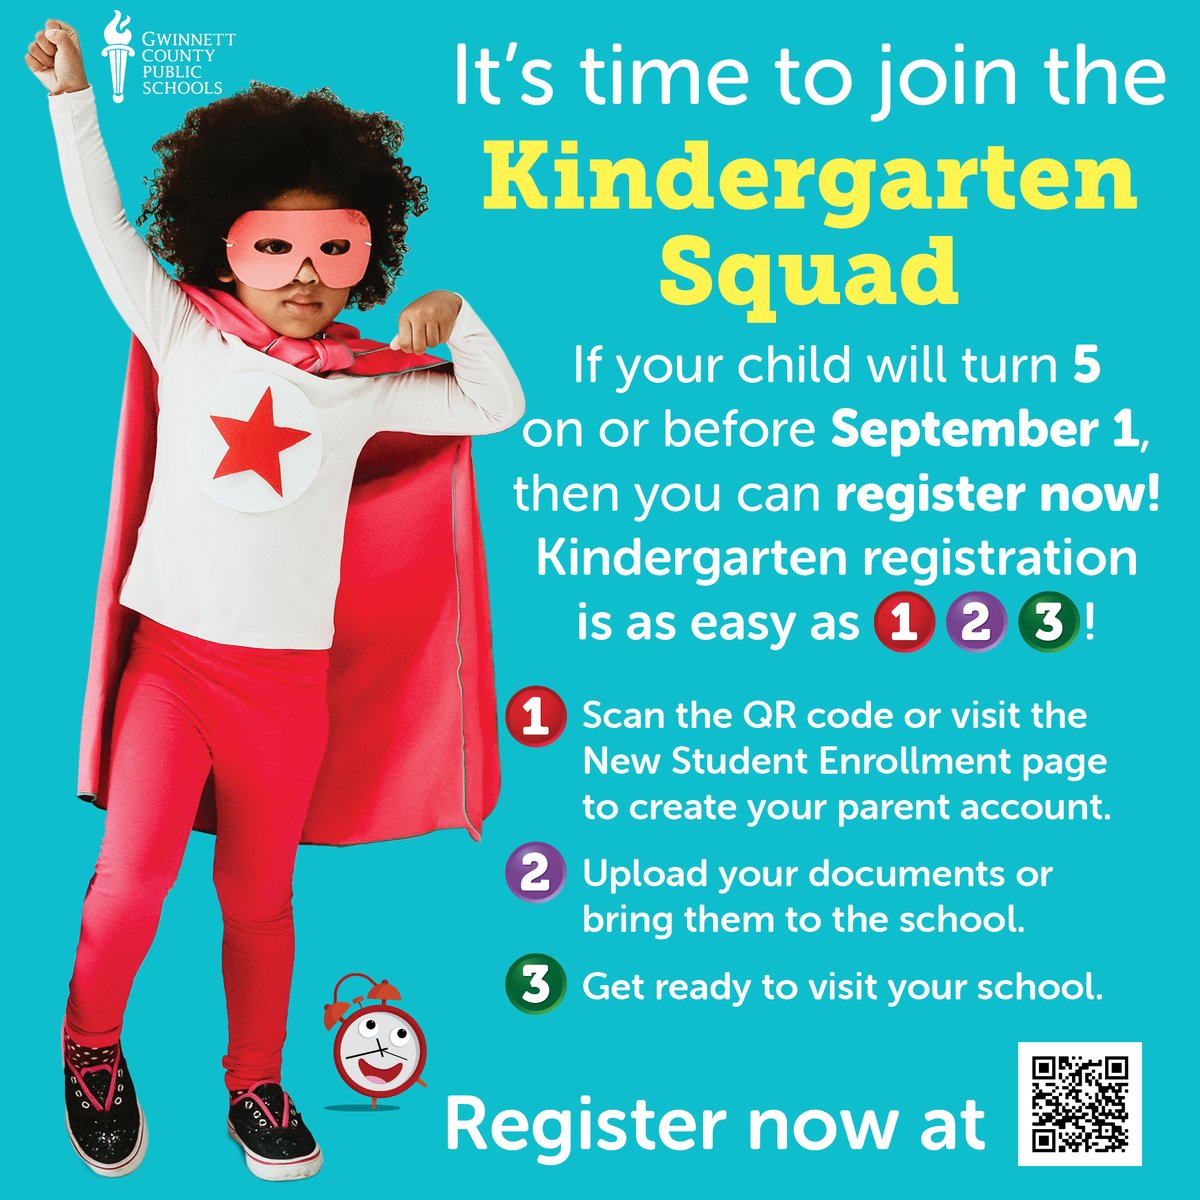 Reminder... We're looking forward to welcoming our new kindergarten students in the 2024-25 school year! If your child will be five years old on or before September 1, 2024, you can register now. Learn how to complete online registration here: gcpsk12.org/schools/new-st…